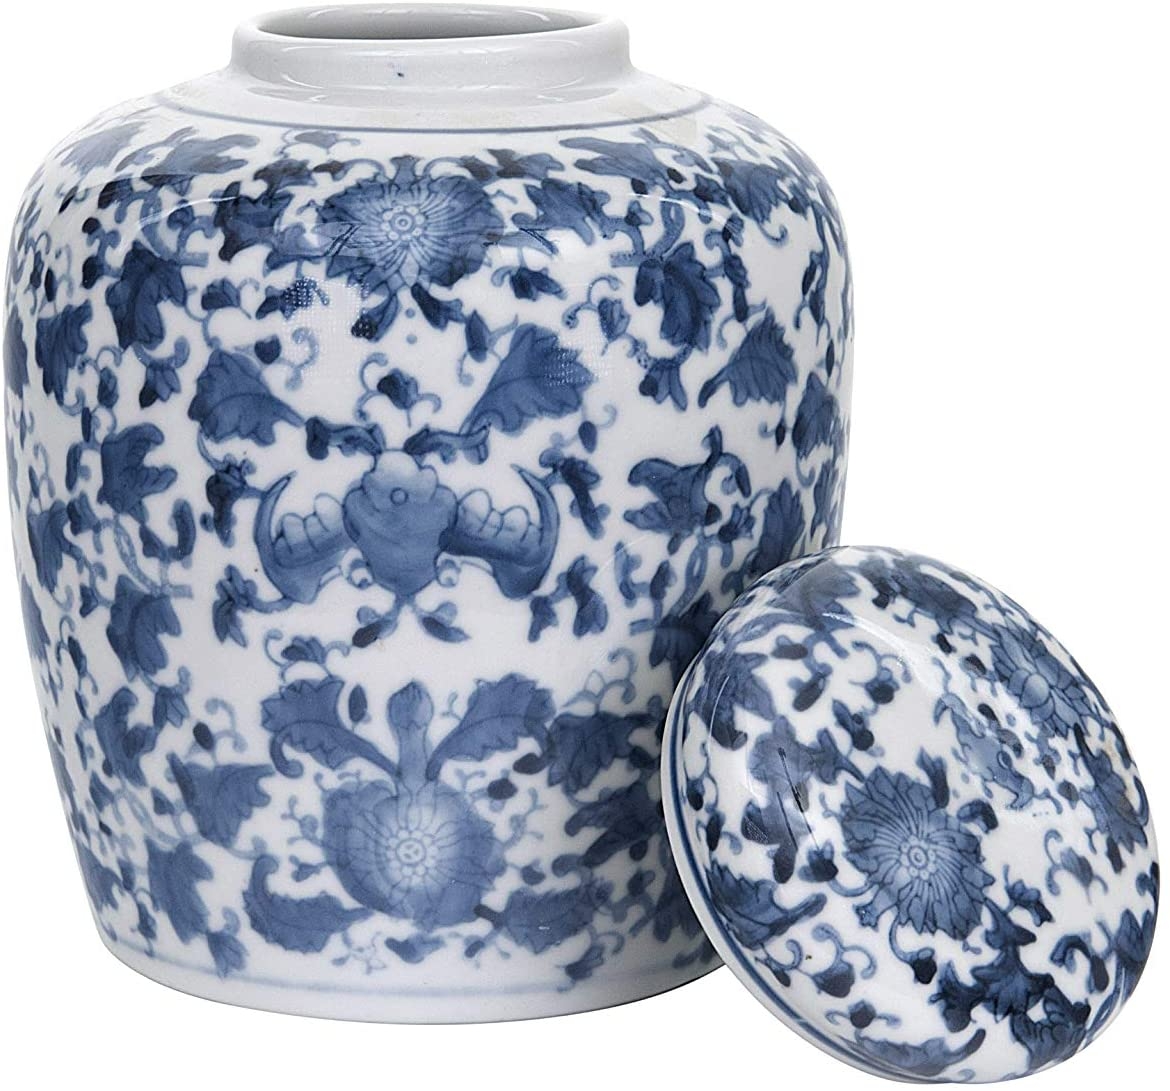 Decorative Blue and White Ceramic Ginger Jar with Lid - Image 1